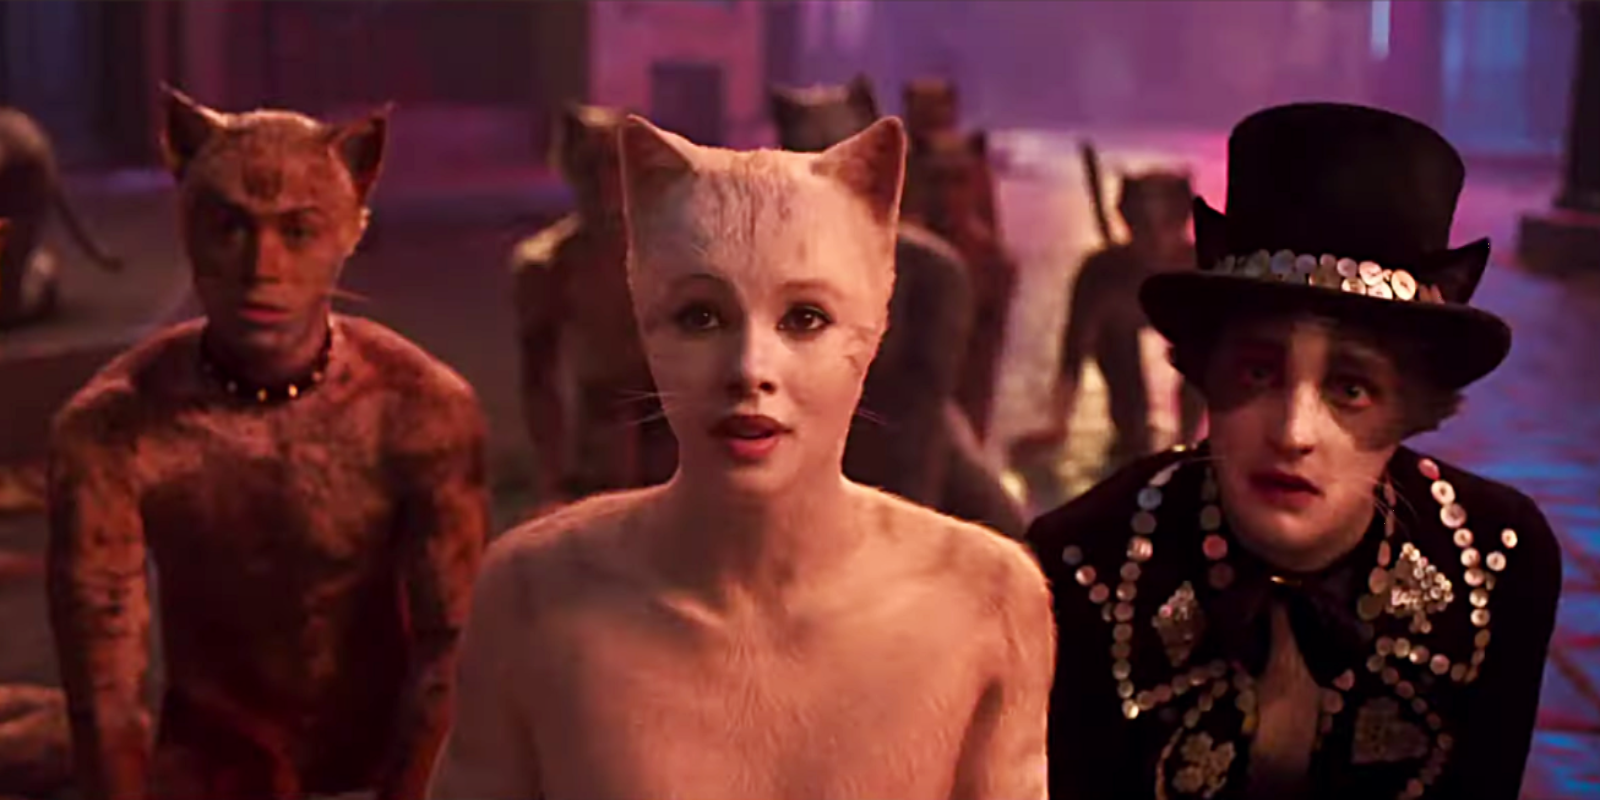 Humanoid cats in the movie Cats